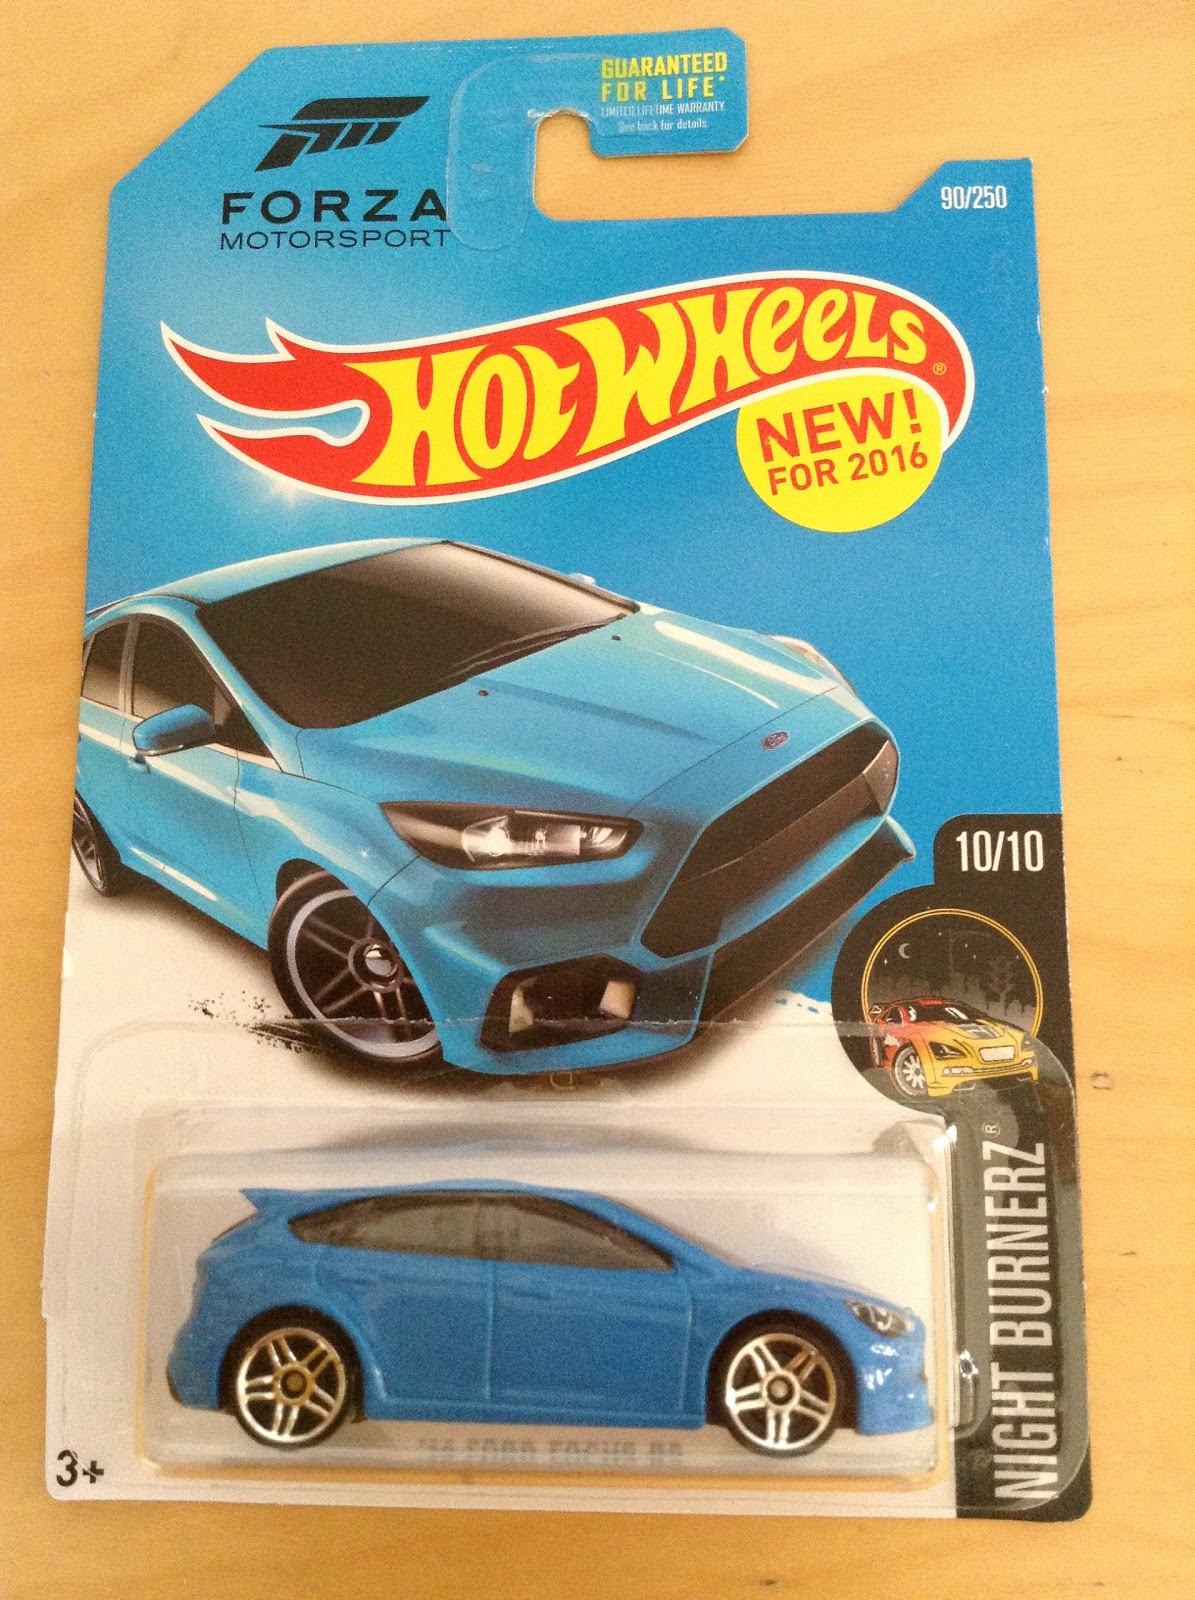 JULIAN'S HOT WHEELS BLOG: 2016 Ford Focus RS (New for 2016! - Forza ...